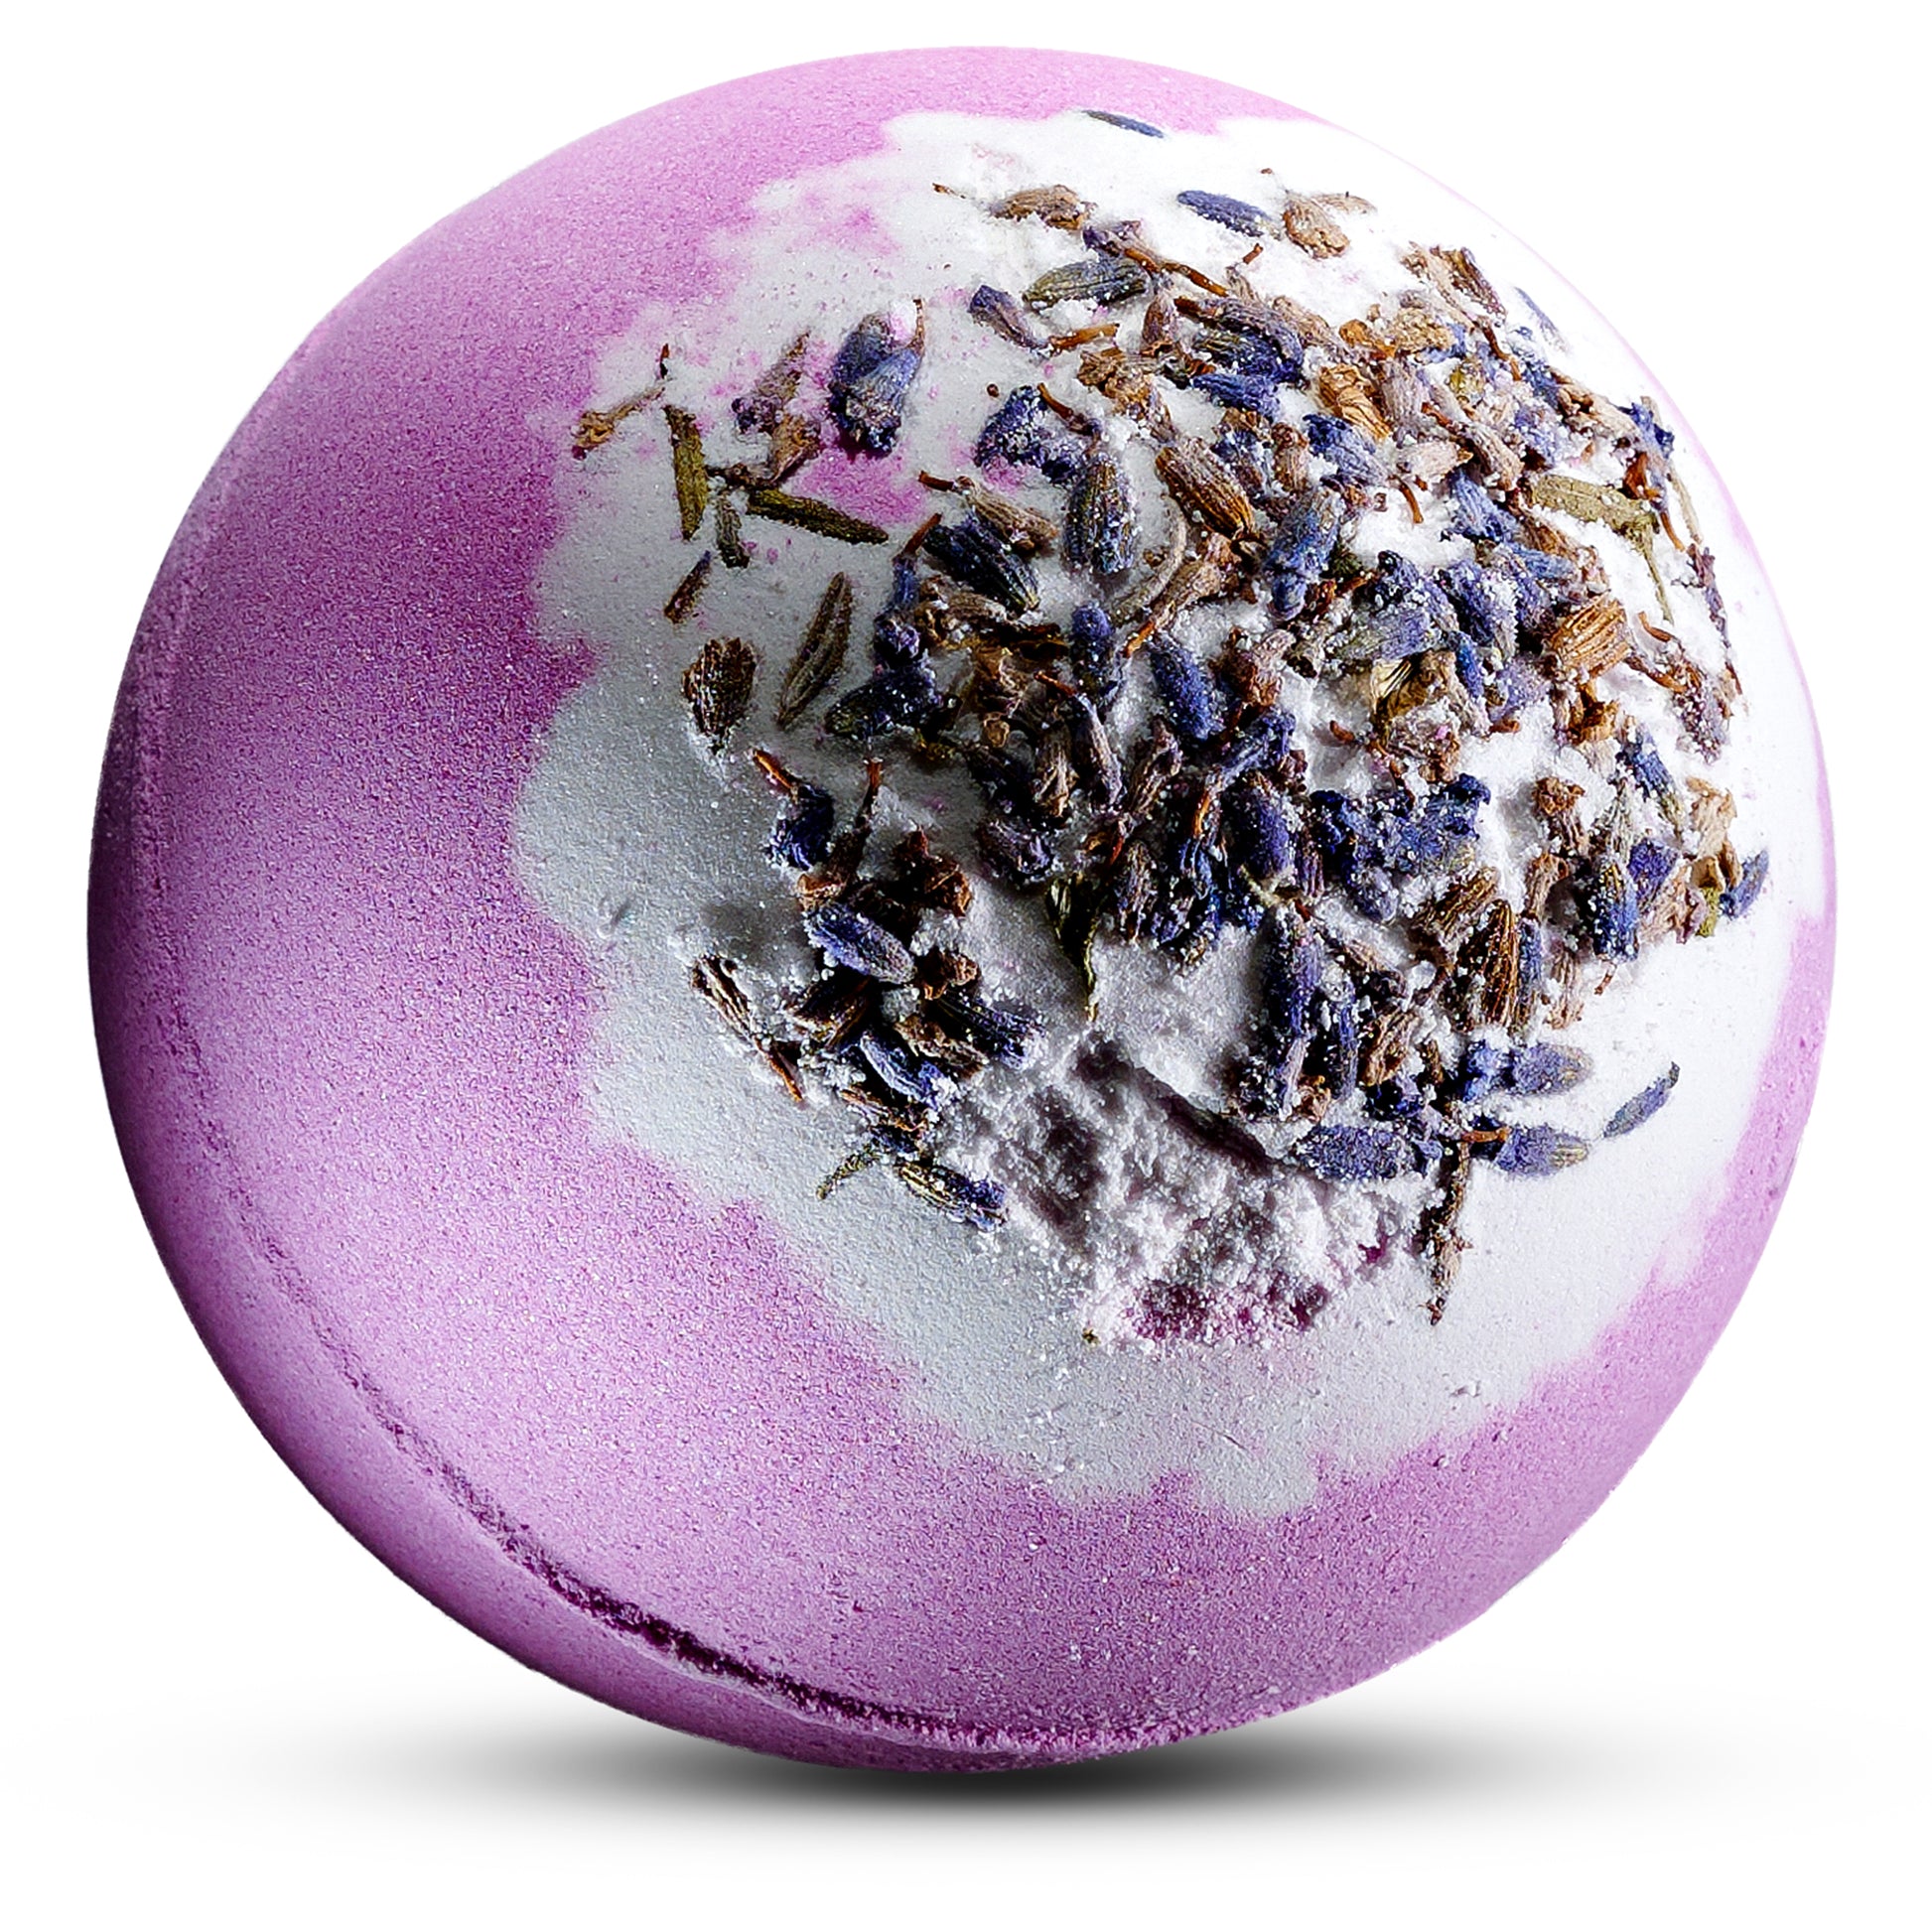  lovery Lavender Bath Bomb, Lavender Bath Bomb, Fizzy Spa Bliss, Handmade Bubble Spa Ball, relaxing Lavender, Stress Relief Bath Fizz, Soothing Zen Experience, Anti-Inflammatory Lavender Oil Benefits, Skin Soothing, Redness Reduction, Calms Itchy Rashes, Antifungal Spa, Nourishing Bath Essentials, Vitamin E, Shea Butter, Jojoba Oil Spa, Cruelty-Free, Paraben-Free, Lavender Bath Bomb Love, Vegan-Friendly, Handmade Self-Care Delight